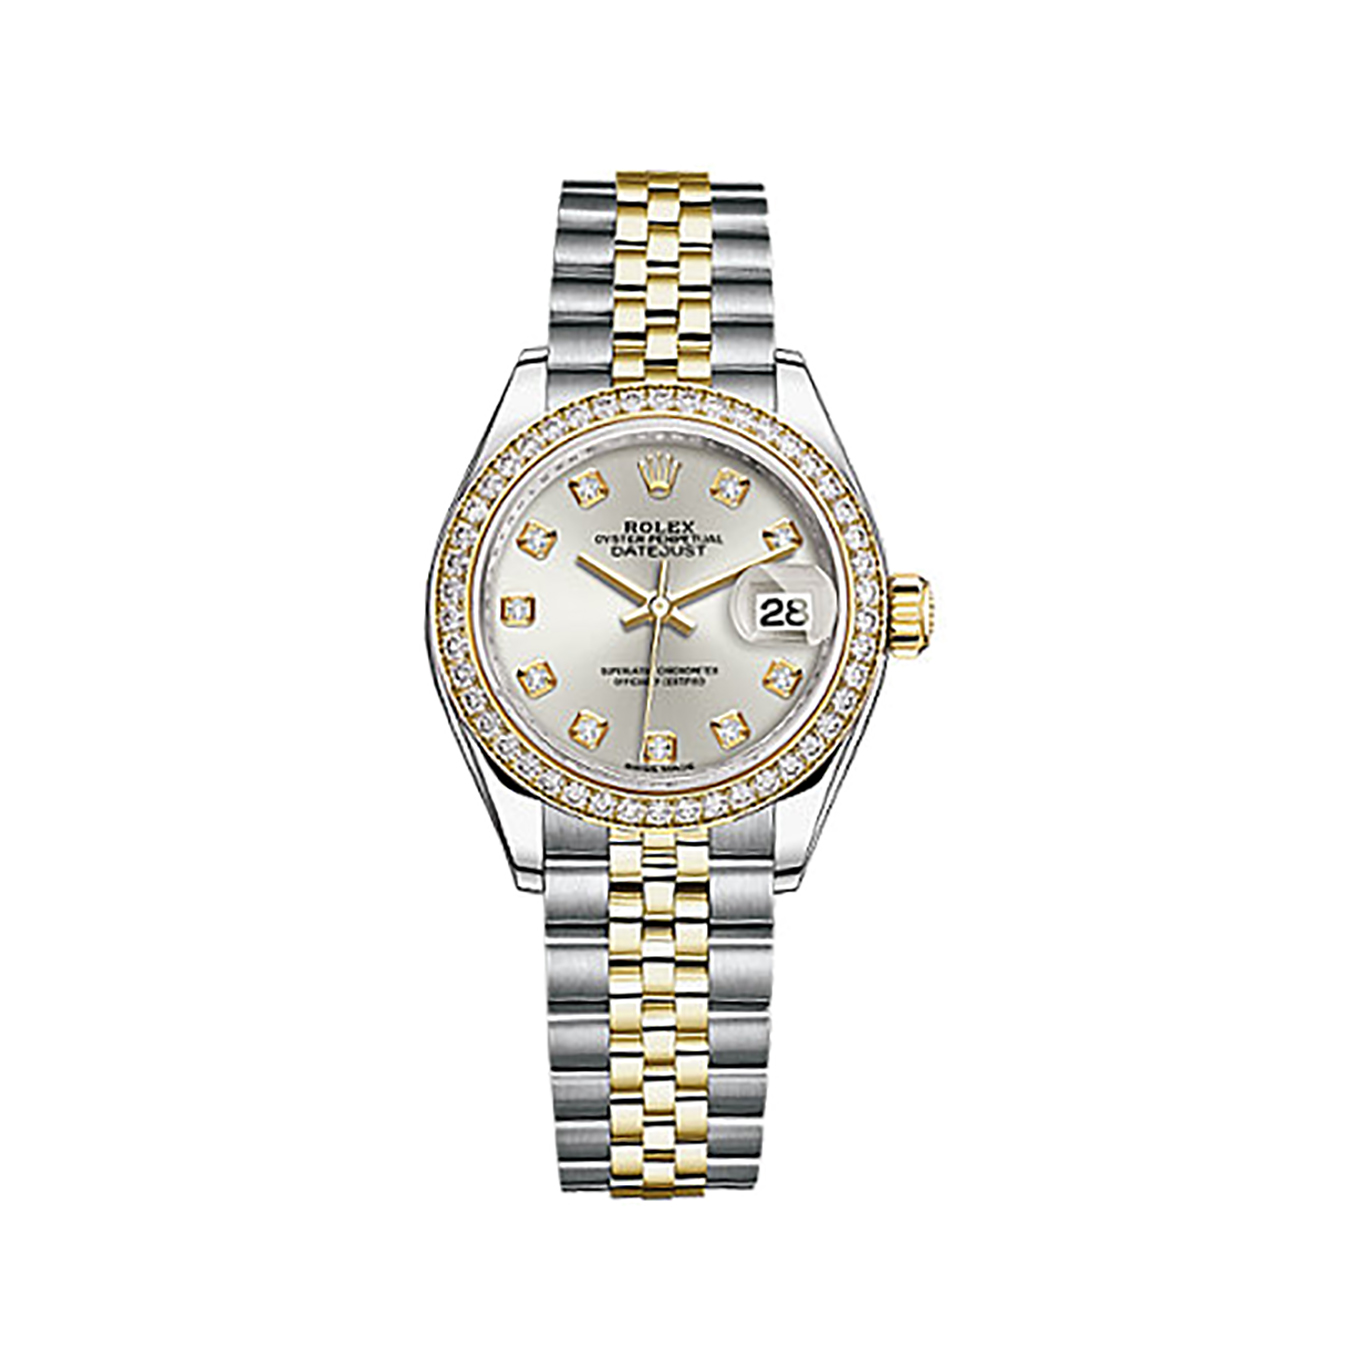 Lady-Datejust 28 279383RBR Gold & Stainless Steel & Diamonds Watch (Silver Set with Diamonds)